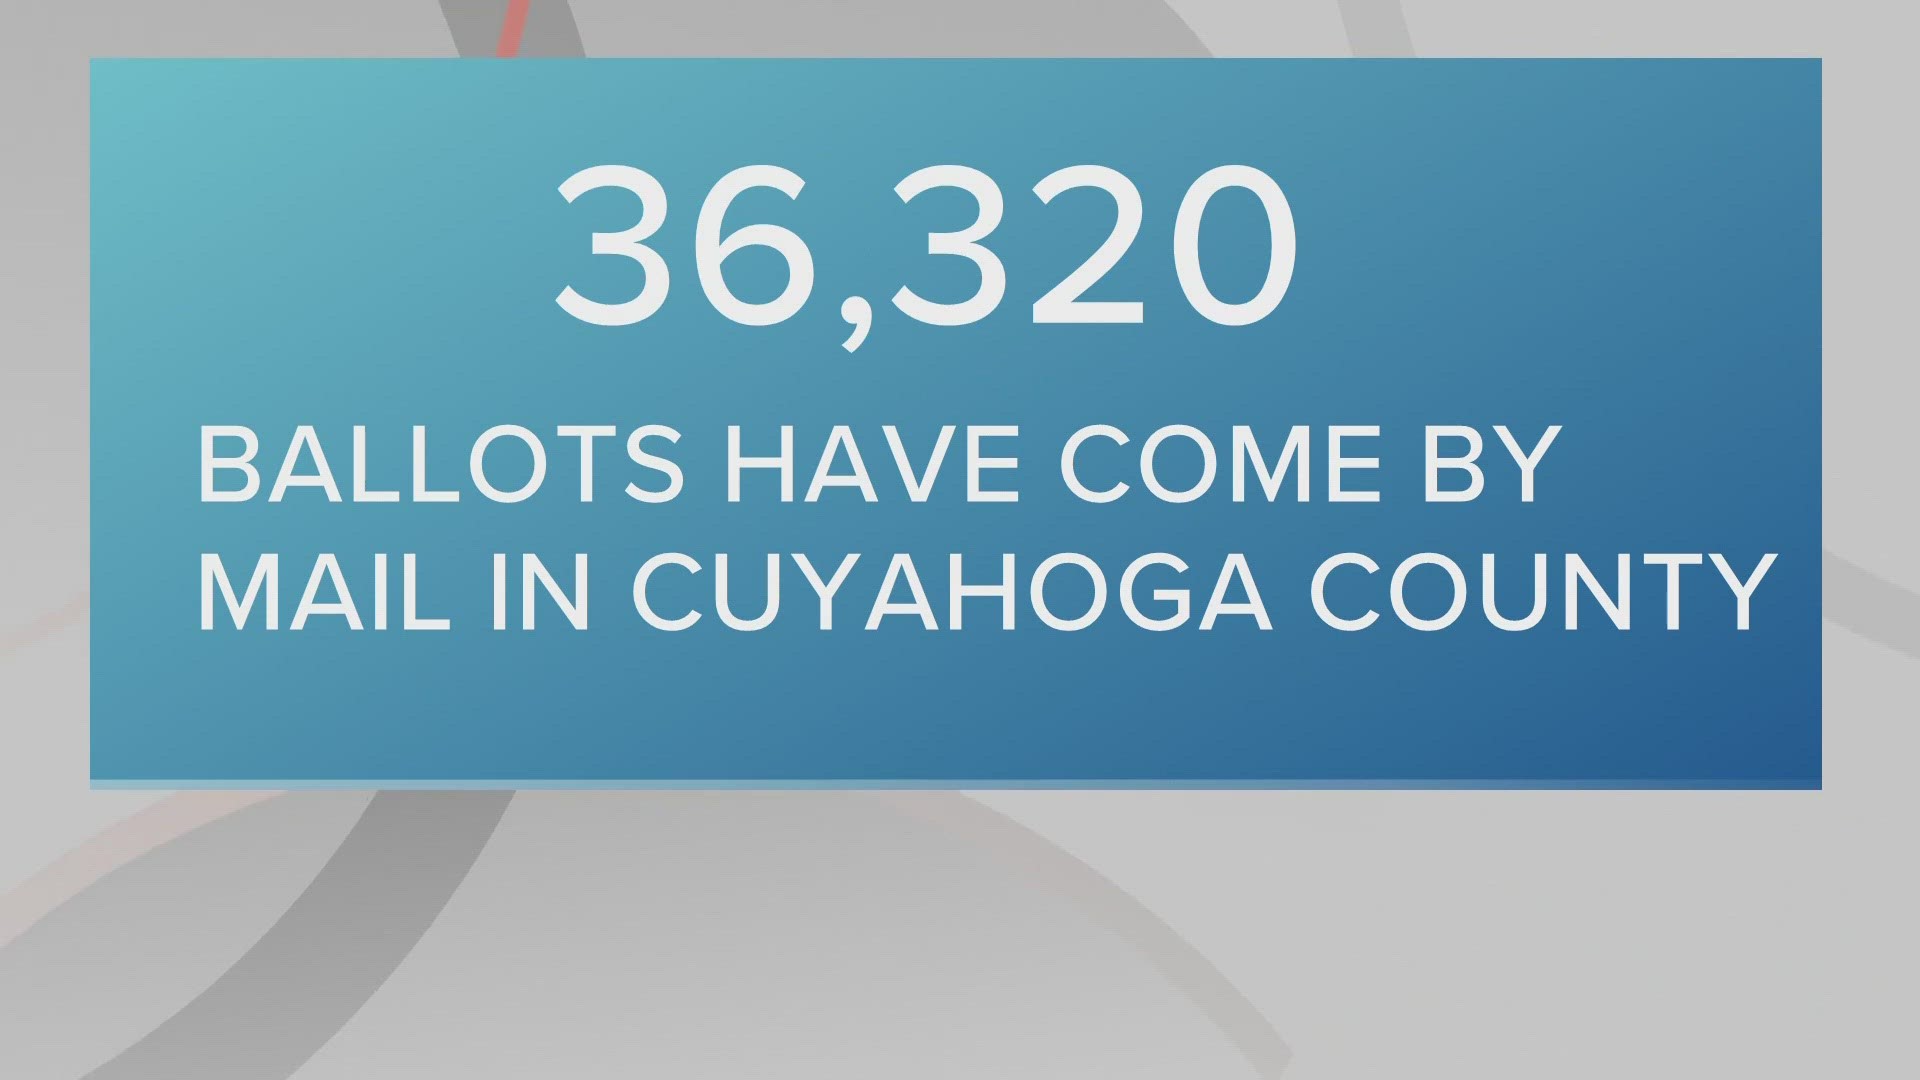 More than 40,000 people have voted early in Cuyahoga County, either by mail or in person.